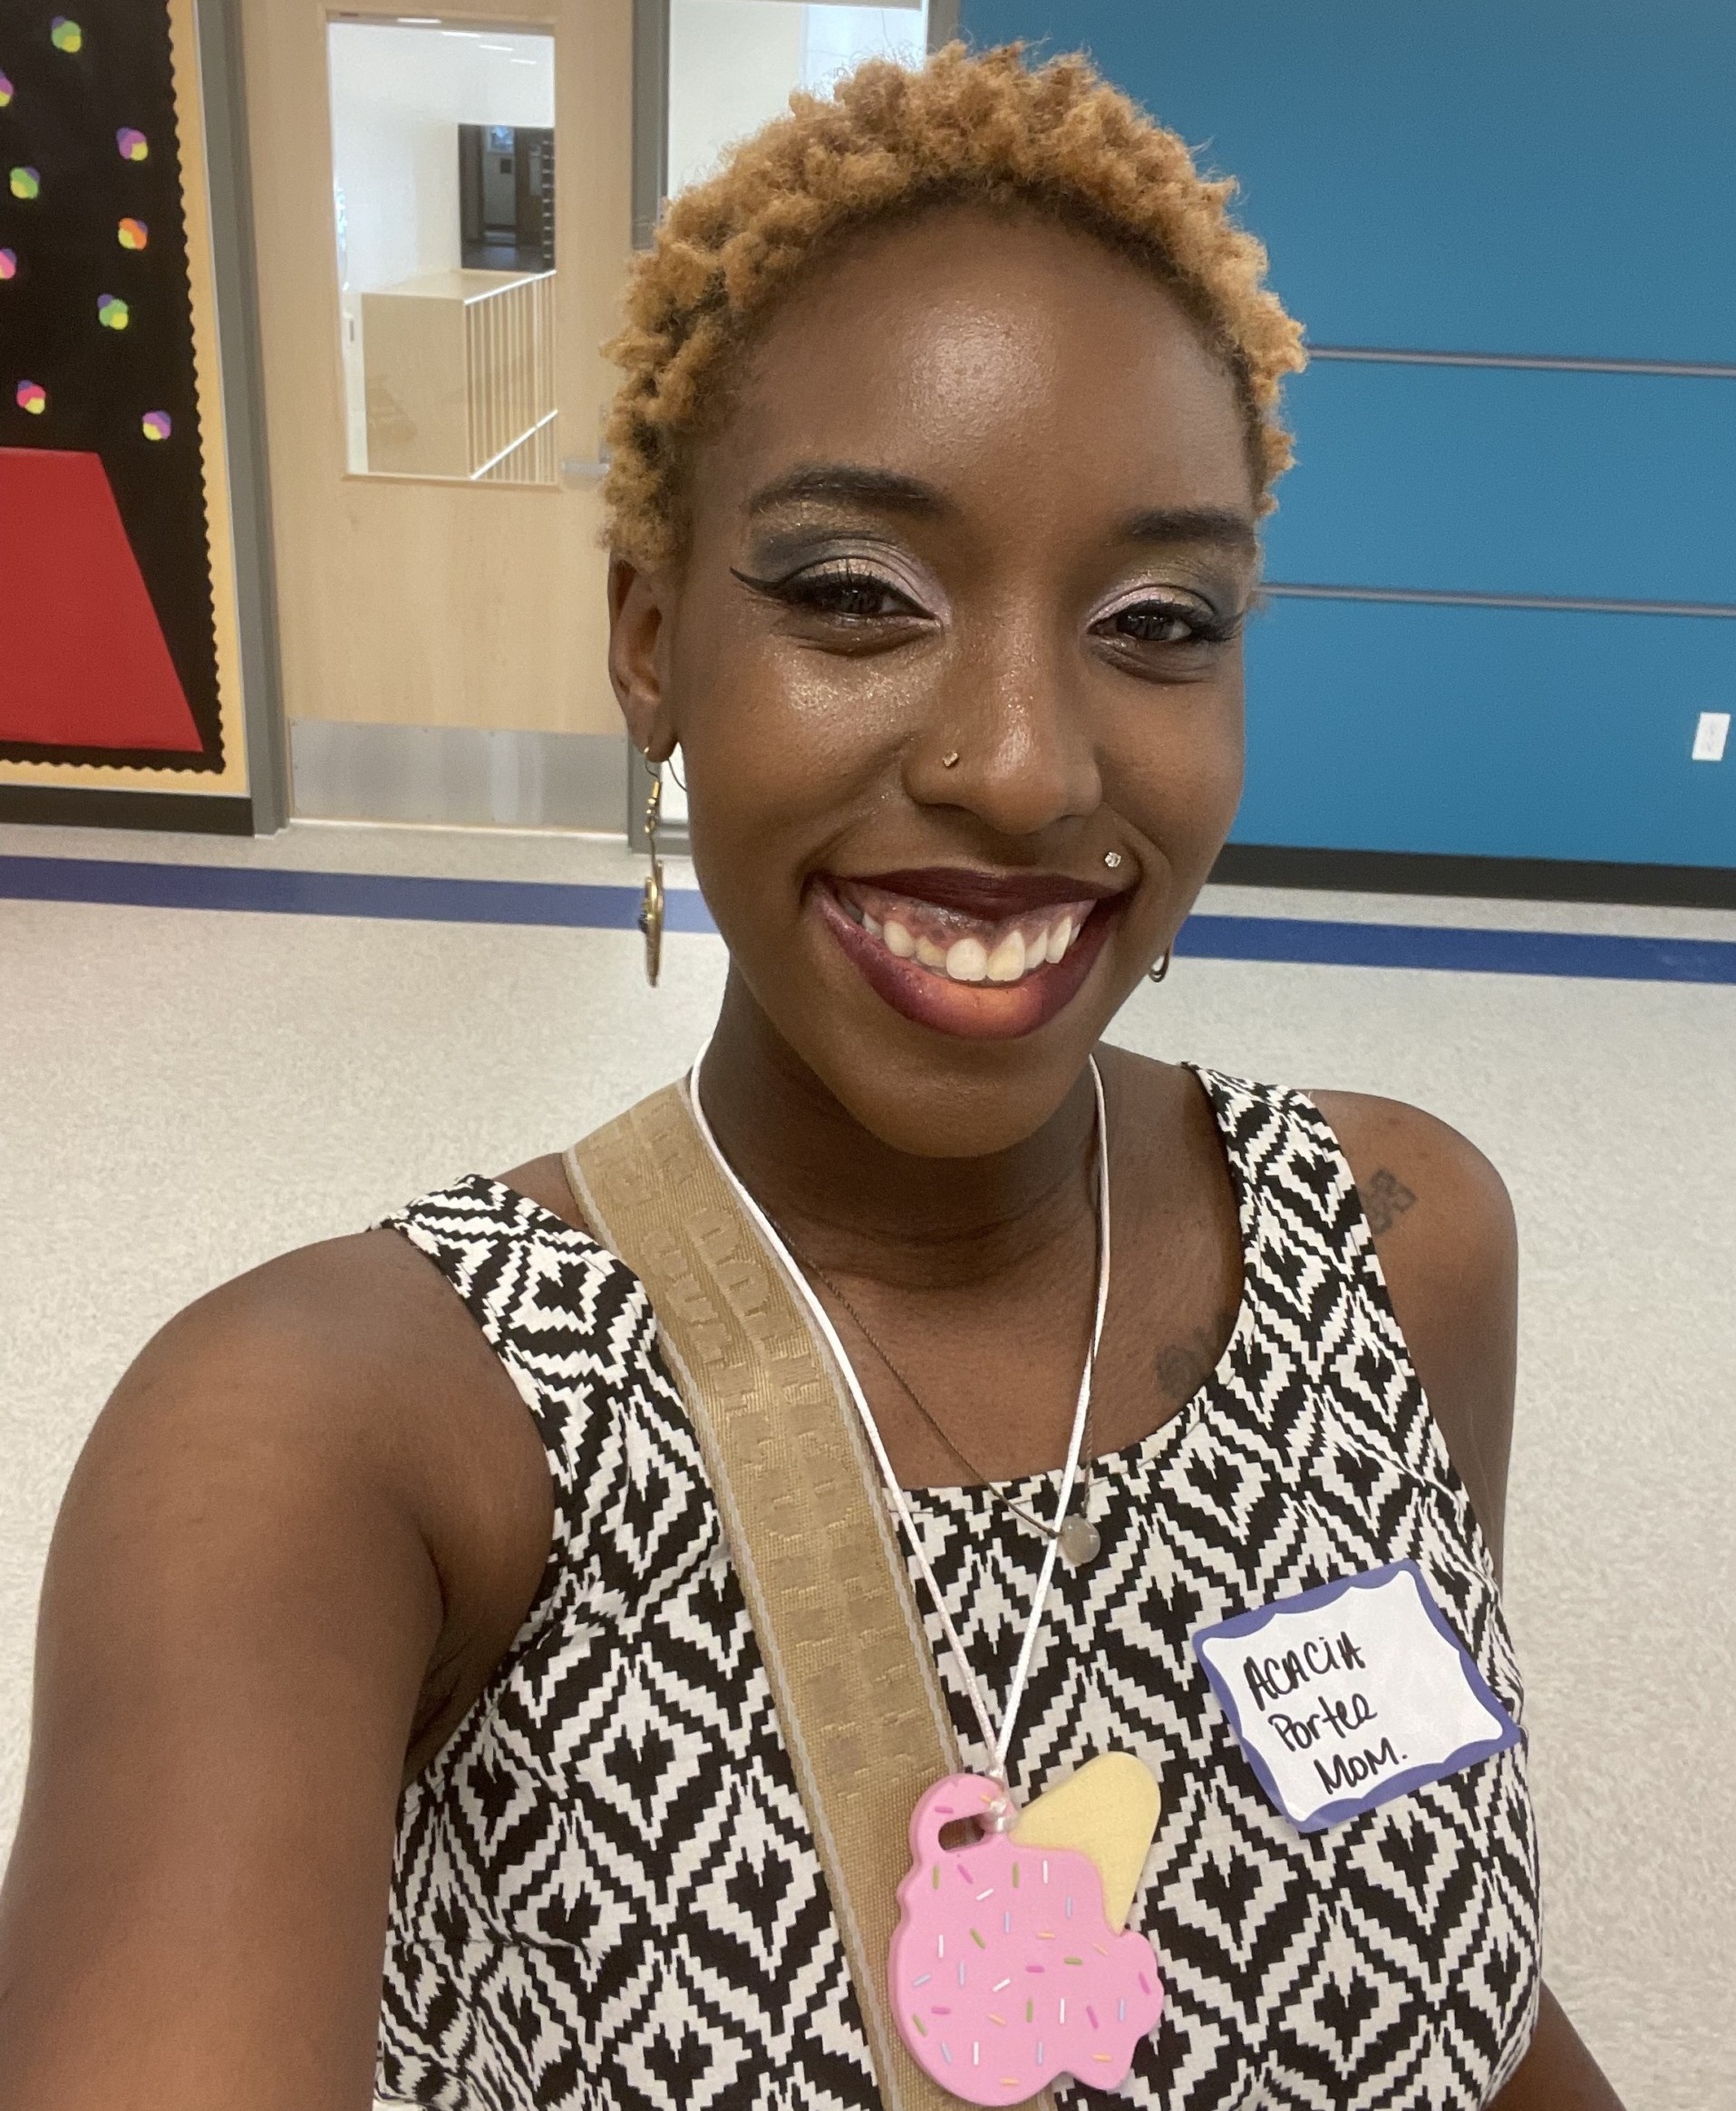 Black charter school: Black woman with short blonde hair in black and white sleeveless geometric print top smiles into camera